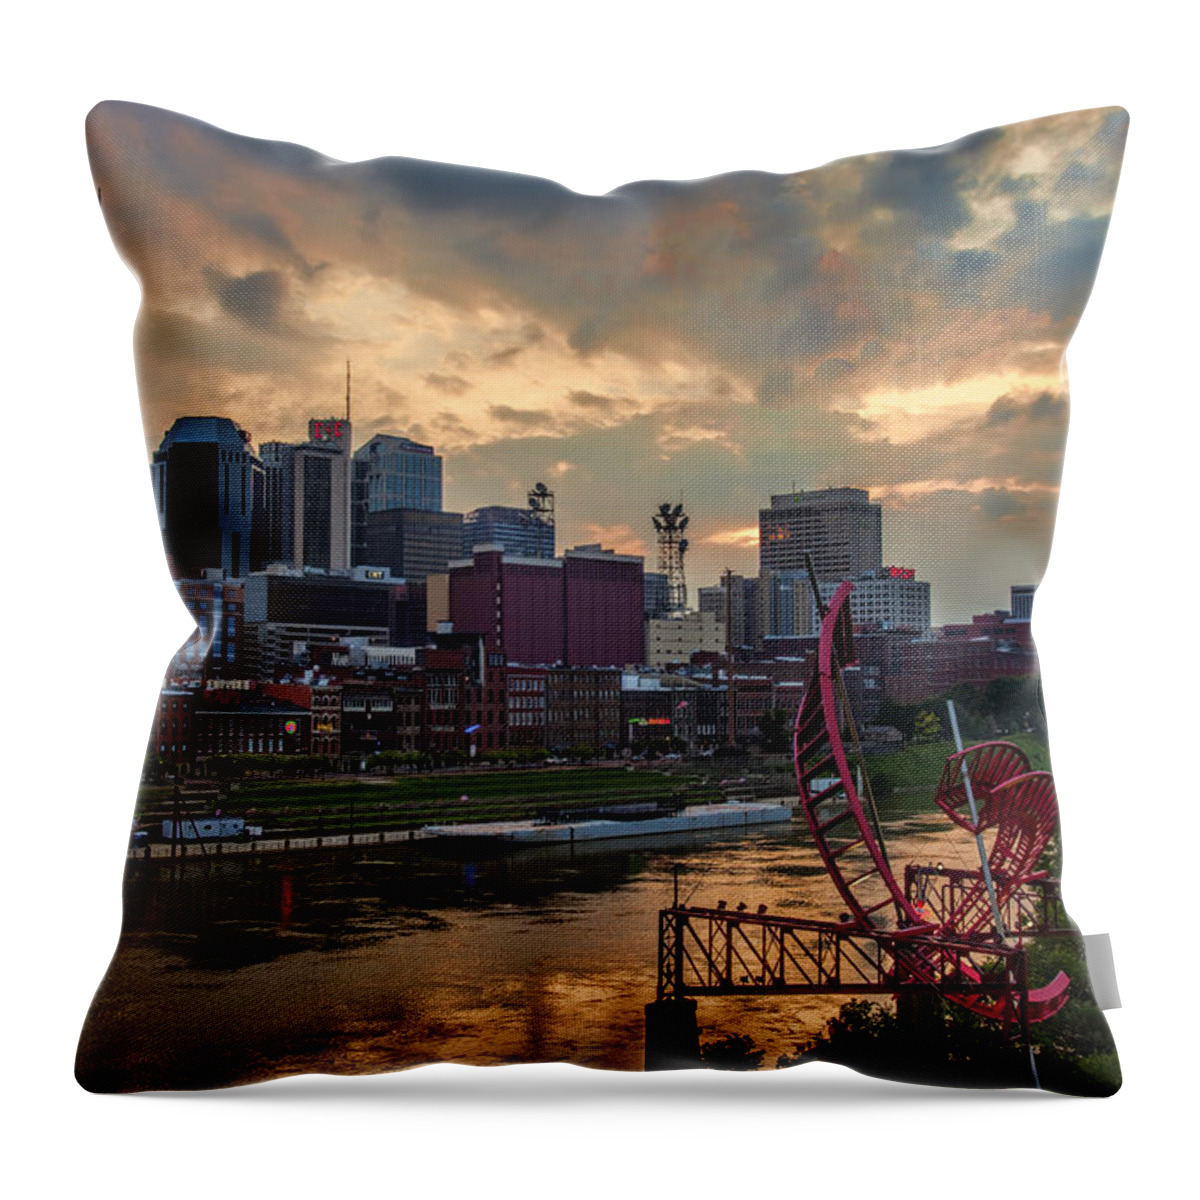 Neon Throw Pillow featuring the photograph Sunset Nashville by Diana Powell